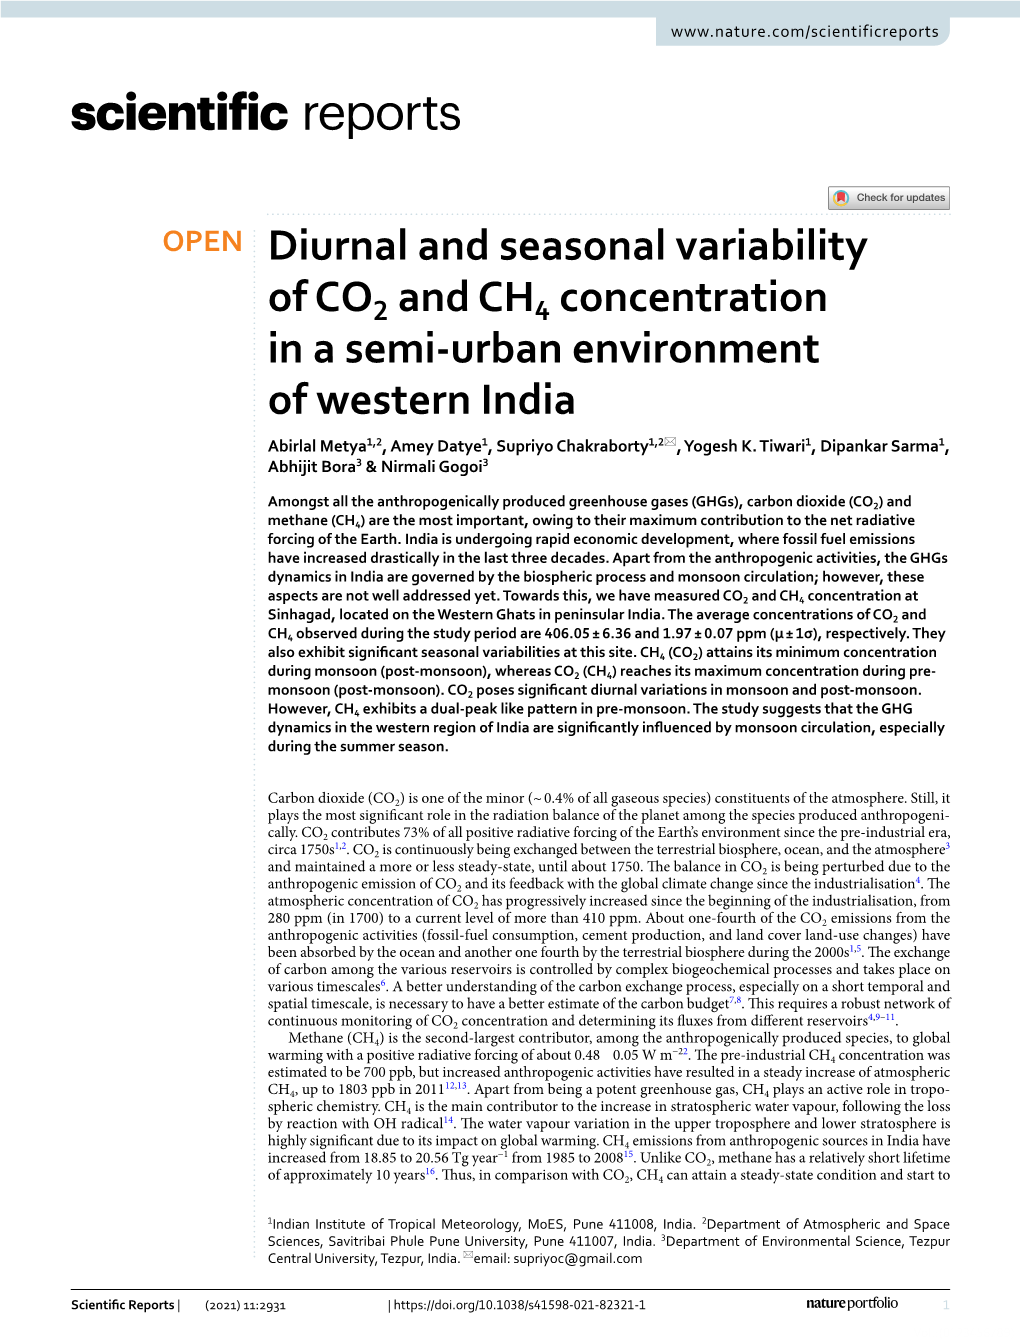 Diurnal and Seasonal Variability of CO2 and CH4 Concentration in A